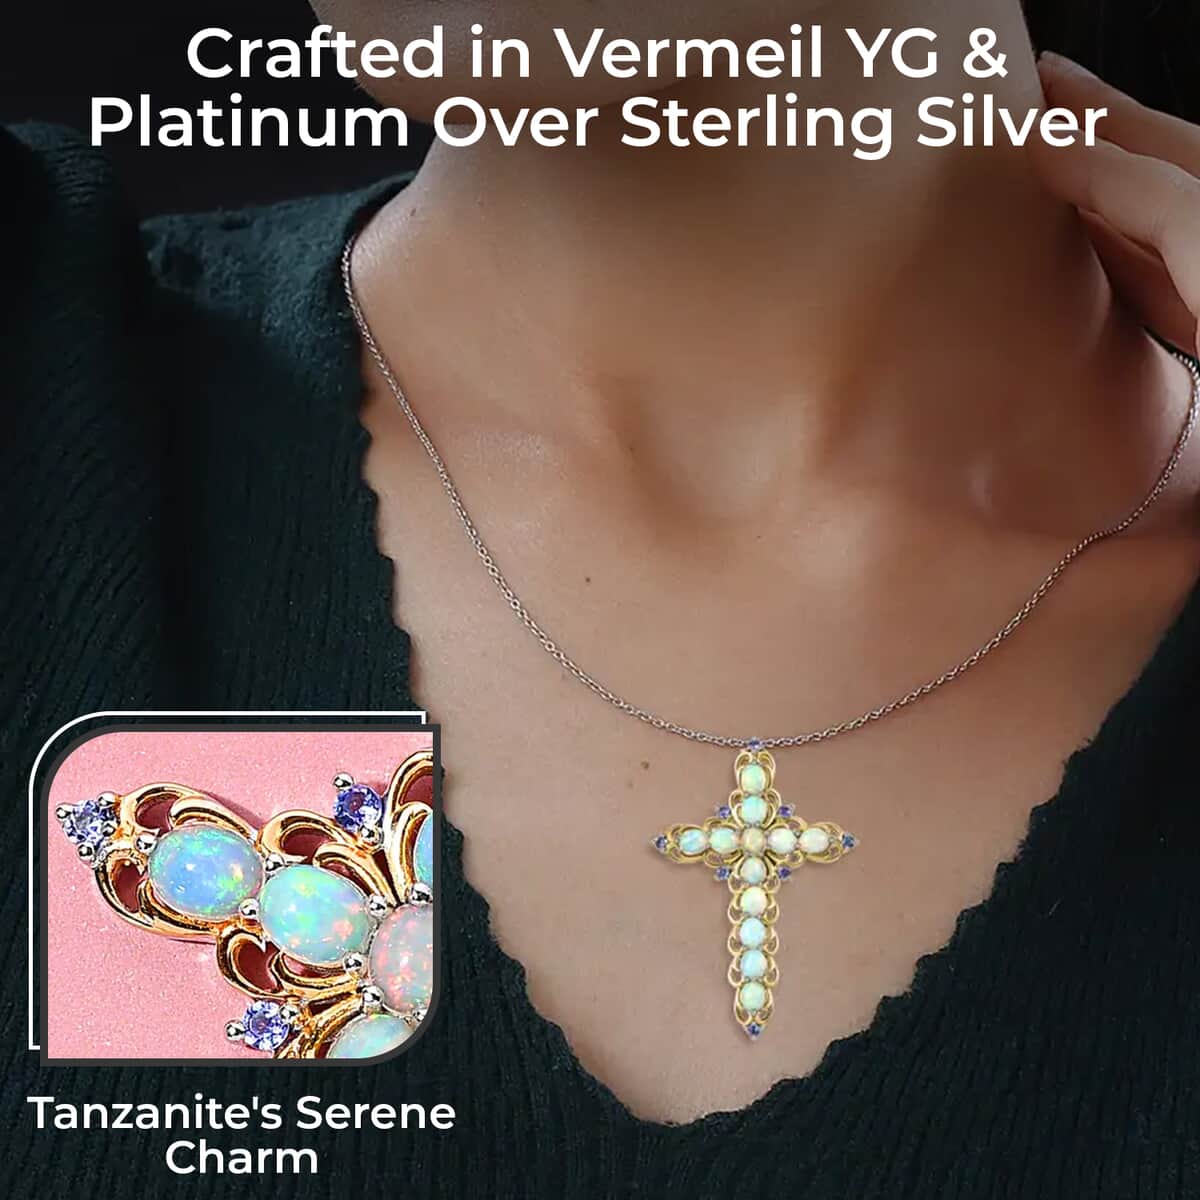 Premium Ethiopian Welo Opal Cross Pendant Necklace, Tanzanite Accent Cross Pendant Necklace, Vermeil YG and Platinum Over Sterling Silver Necklace, 20 Inch Necklace 3.15 ctw image number 2